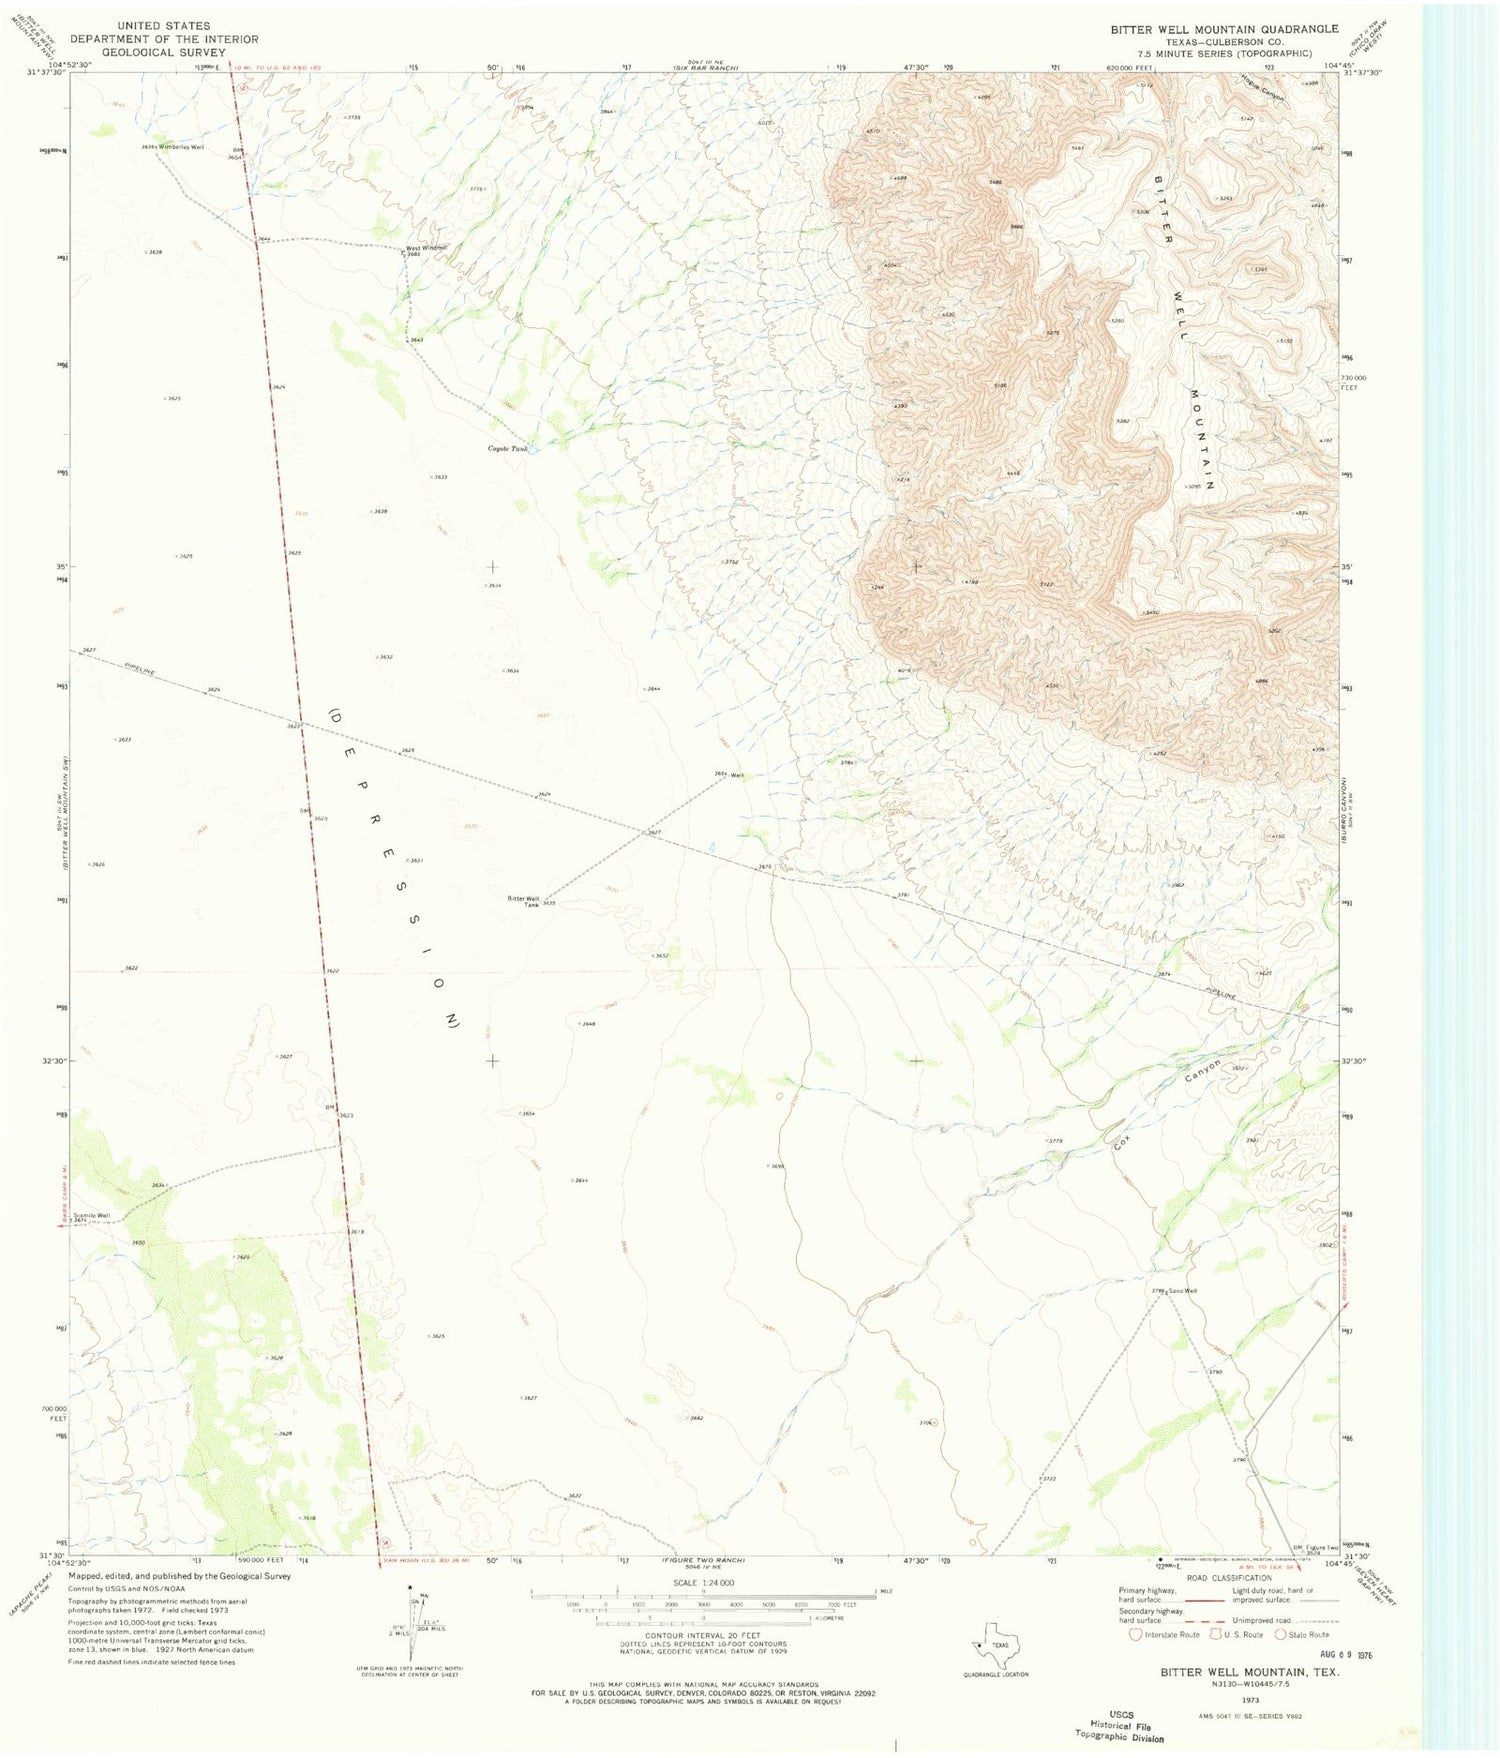 Classic USGS Bitter Well Mountain Texas 7.5'x7.5' Topo Map Image